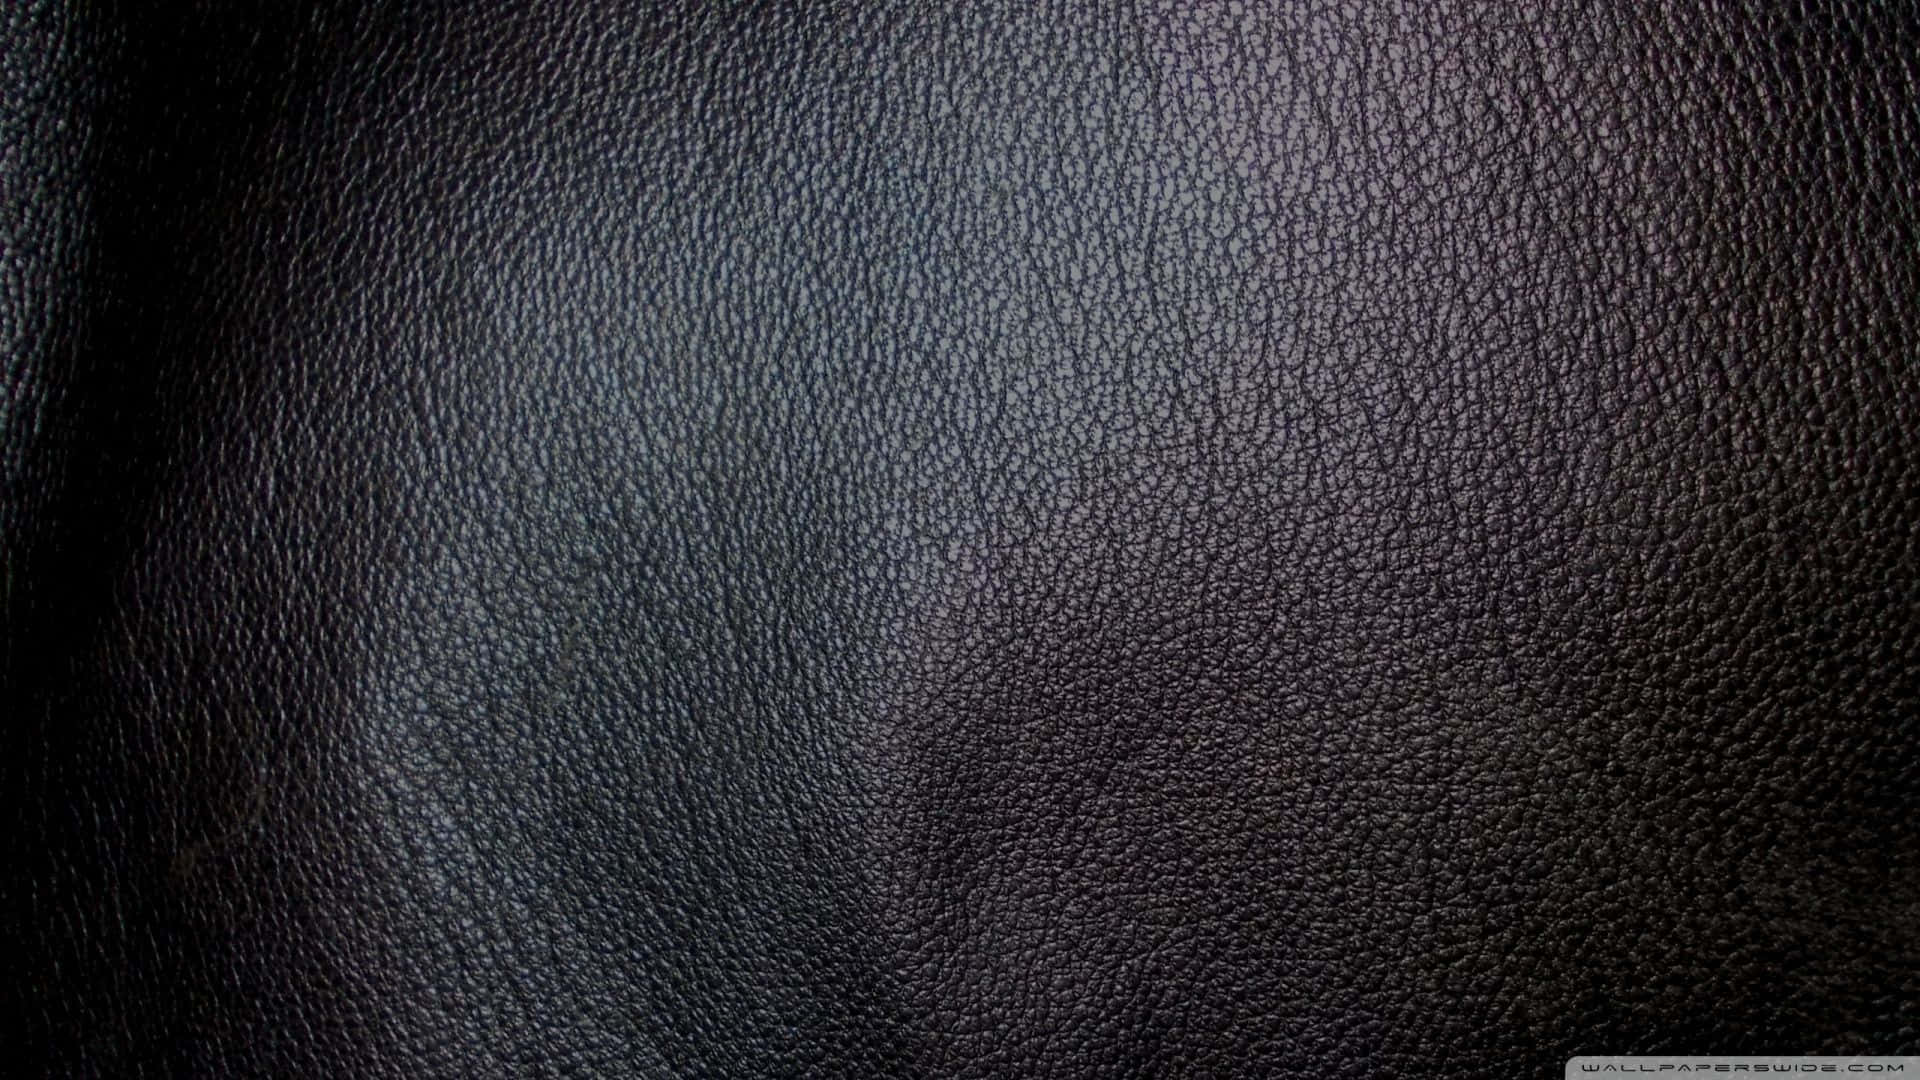 Get the luxurious look and feel of black leather Wallpaper